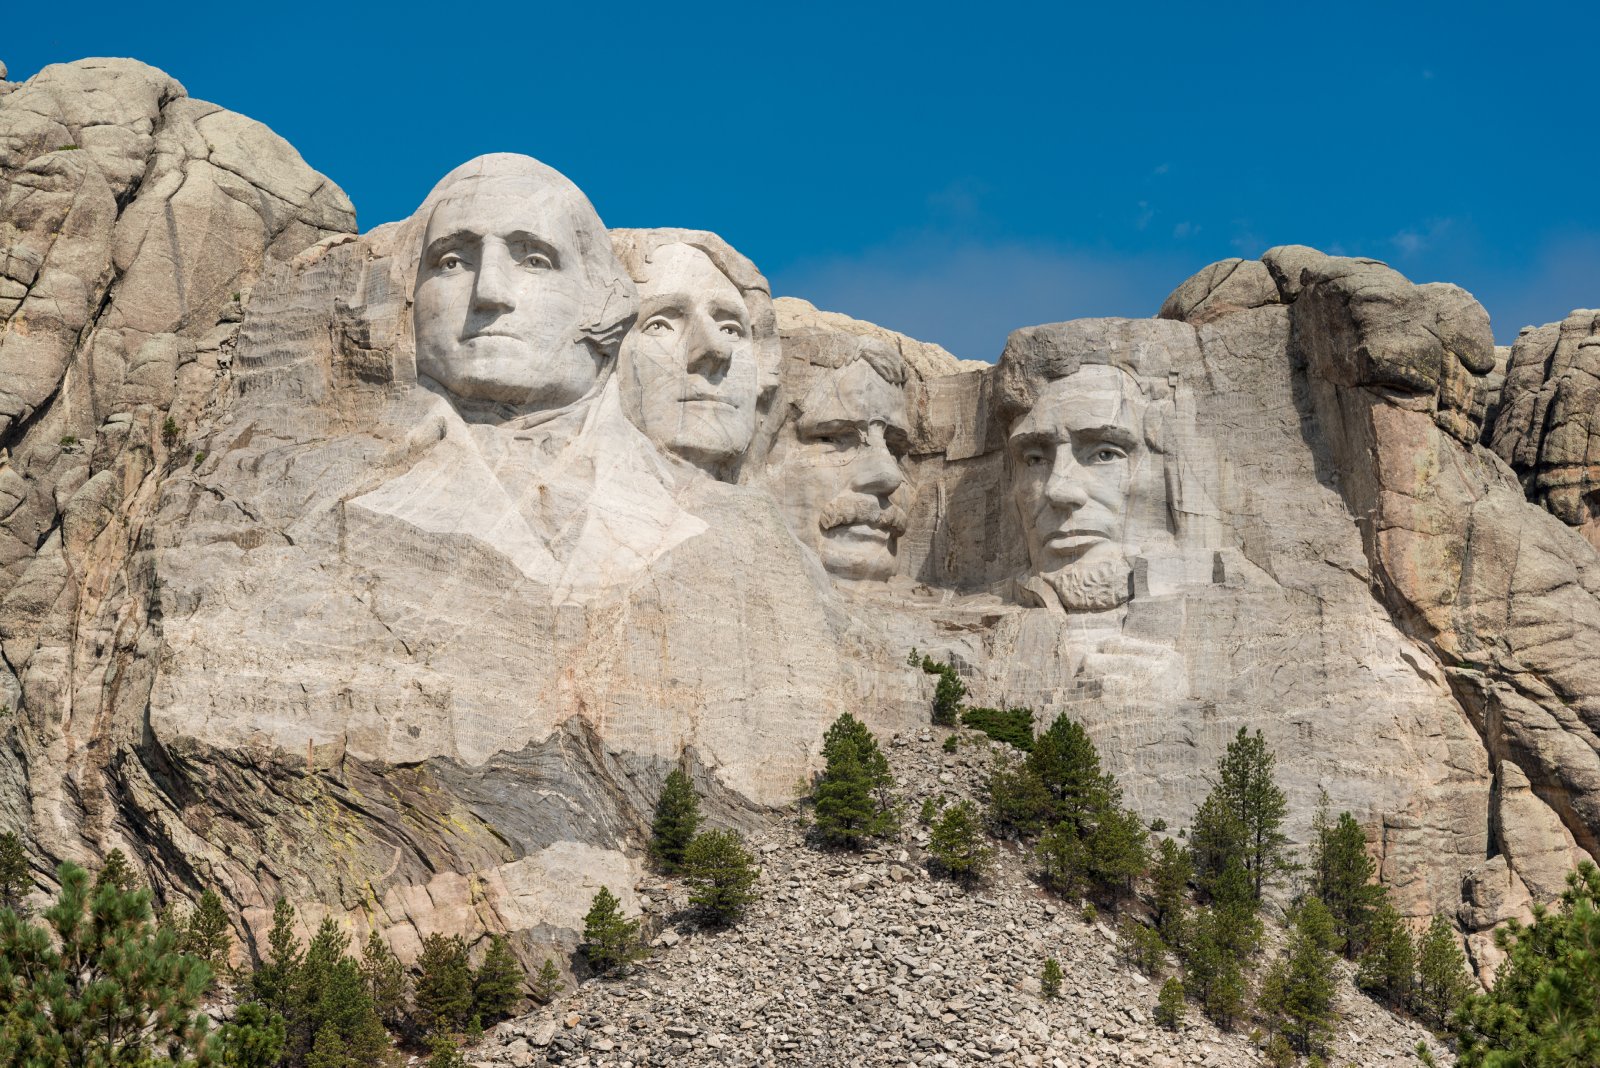 Image Credit: Shutterstock / Nagel Photography <p><span>Marvel at the monumental sculpture of four great American presidents. It’s a patriotic pilgrimage, but the viewing area can feel crowded. Early mornings offer the best experience.</span></p>